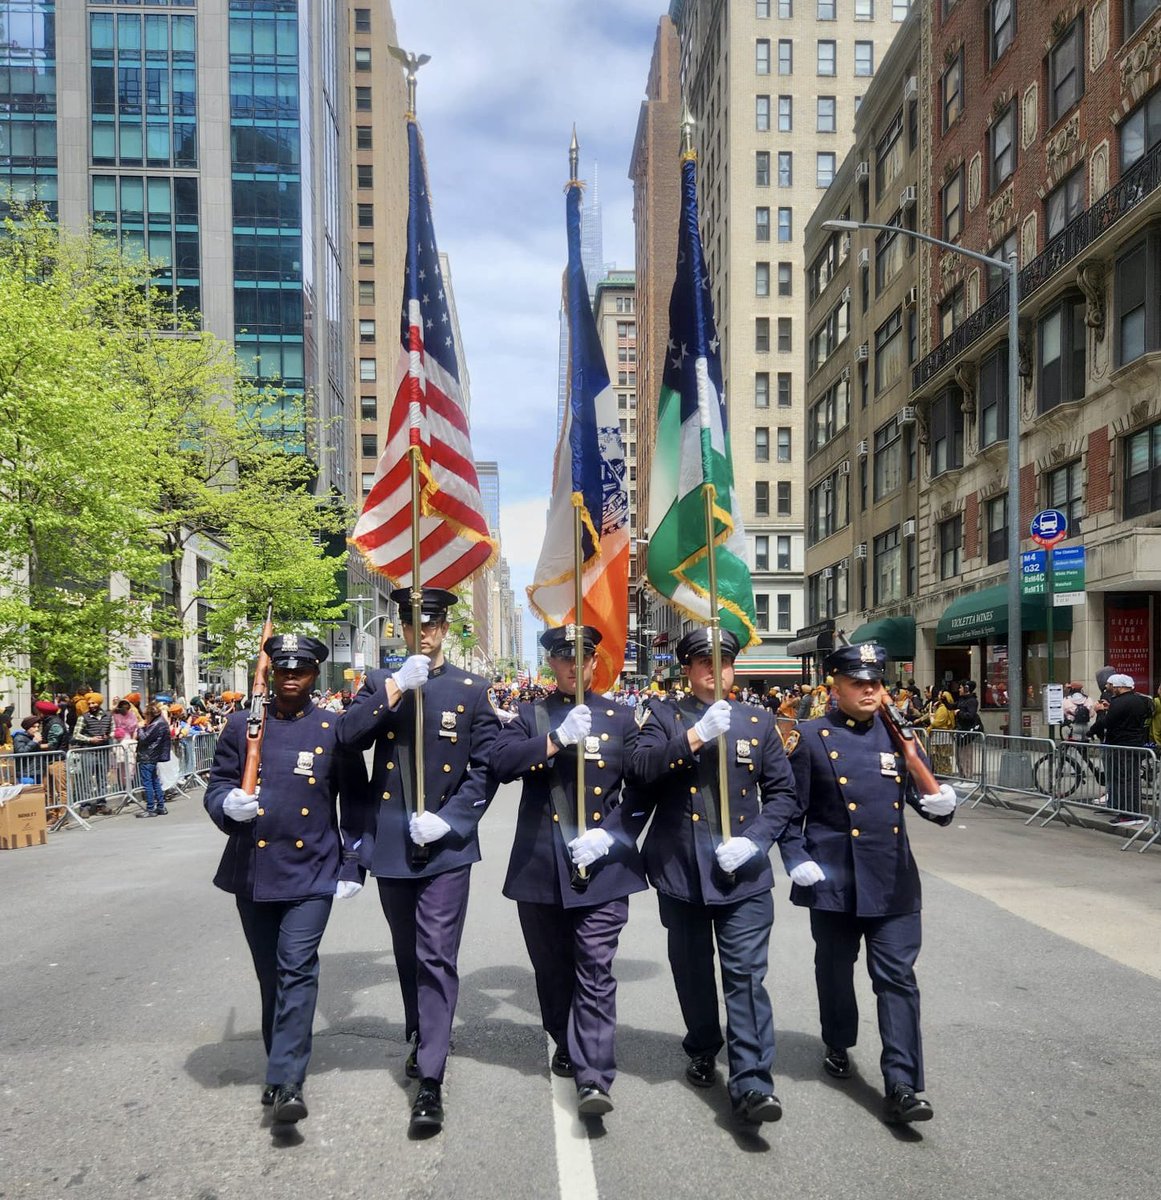 We marched down Madison Avenue for the 36th Annual Sikh Day Parade. Thank you to everyone from the @SikhOfficers Association for making the parade so special. @NYPDnews